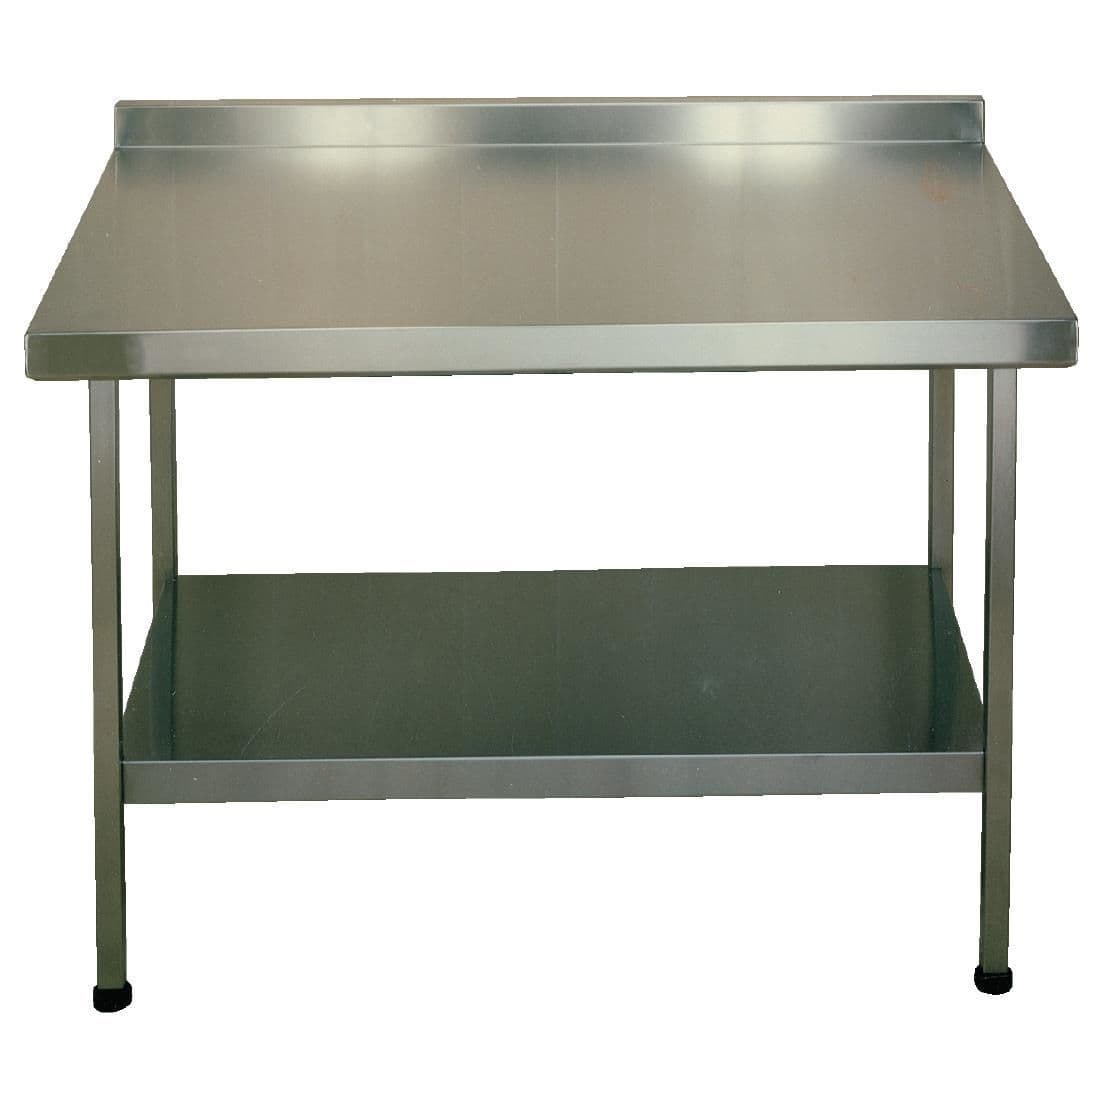 Franke Sissons Stainless Steel Wall Table with Upstand 1800x600mm JD Catering Equipment Solutions Ltd